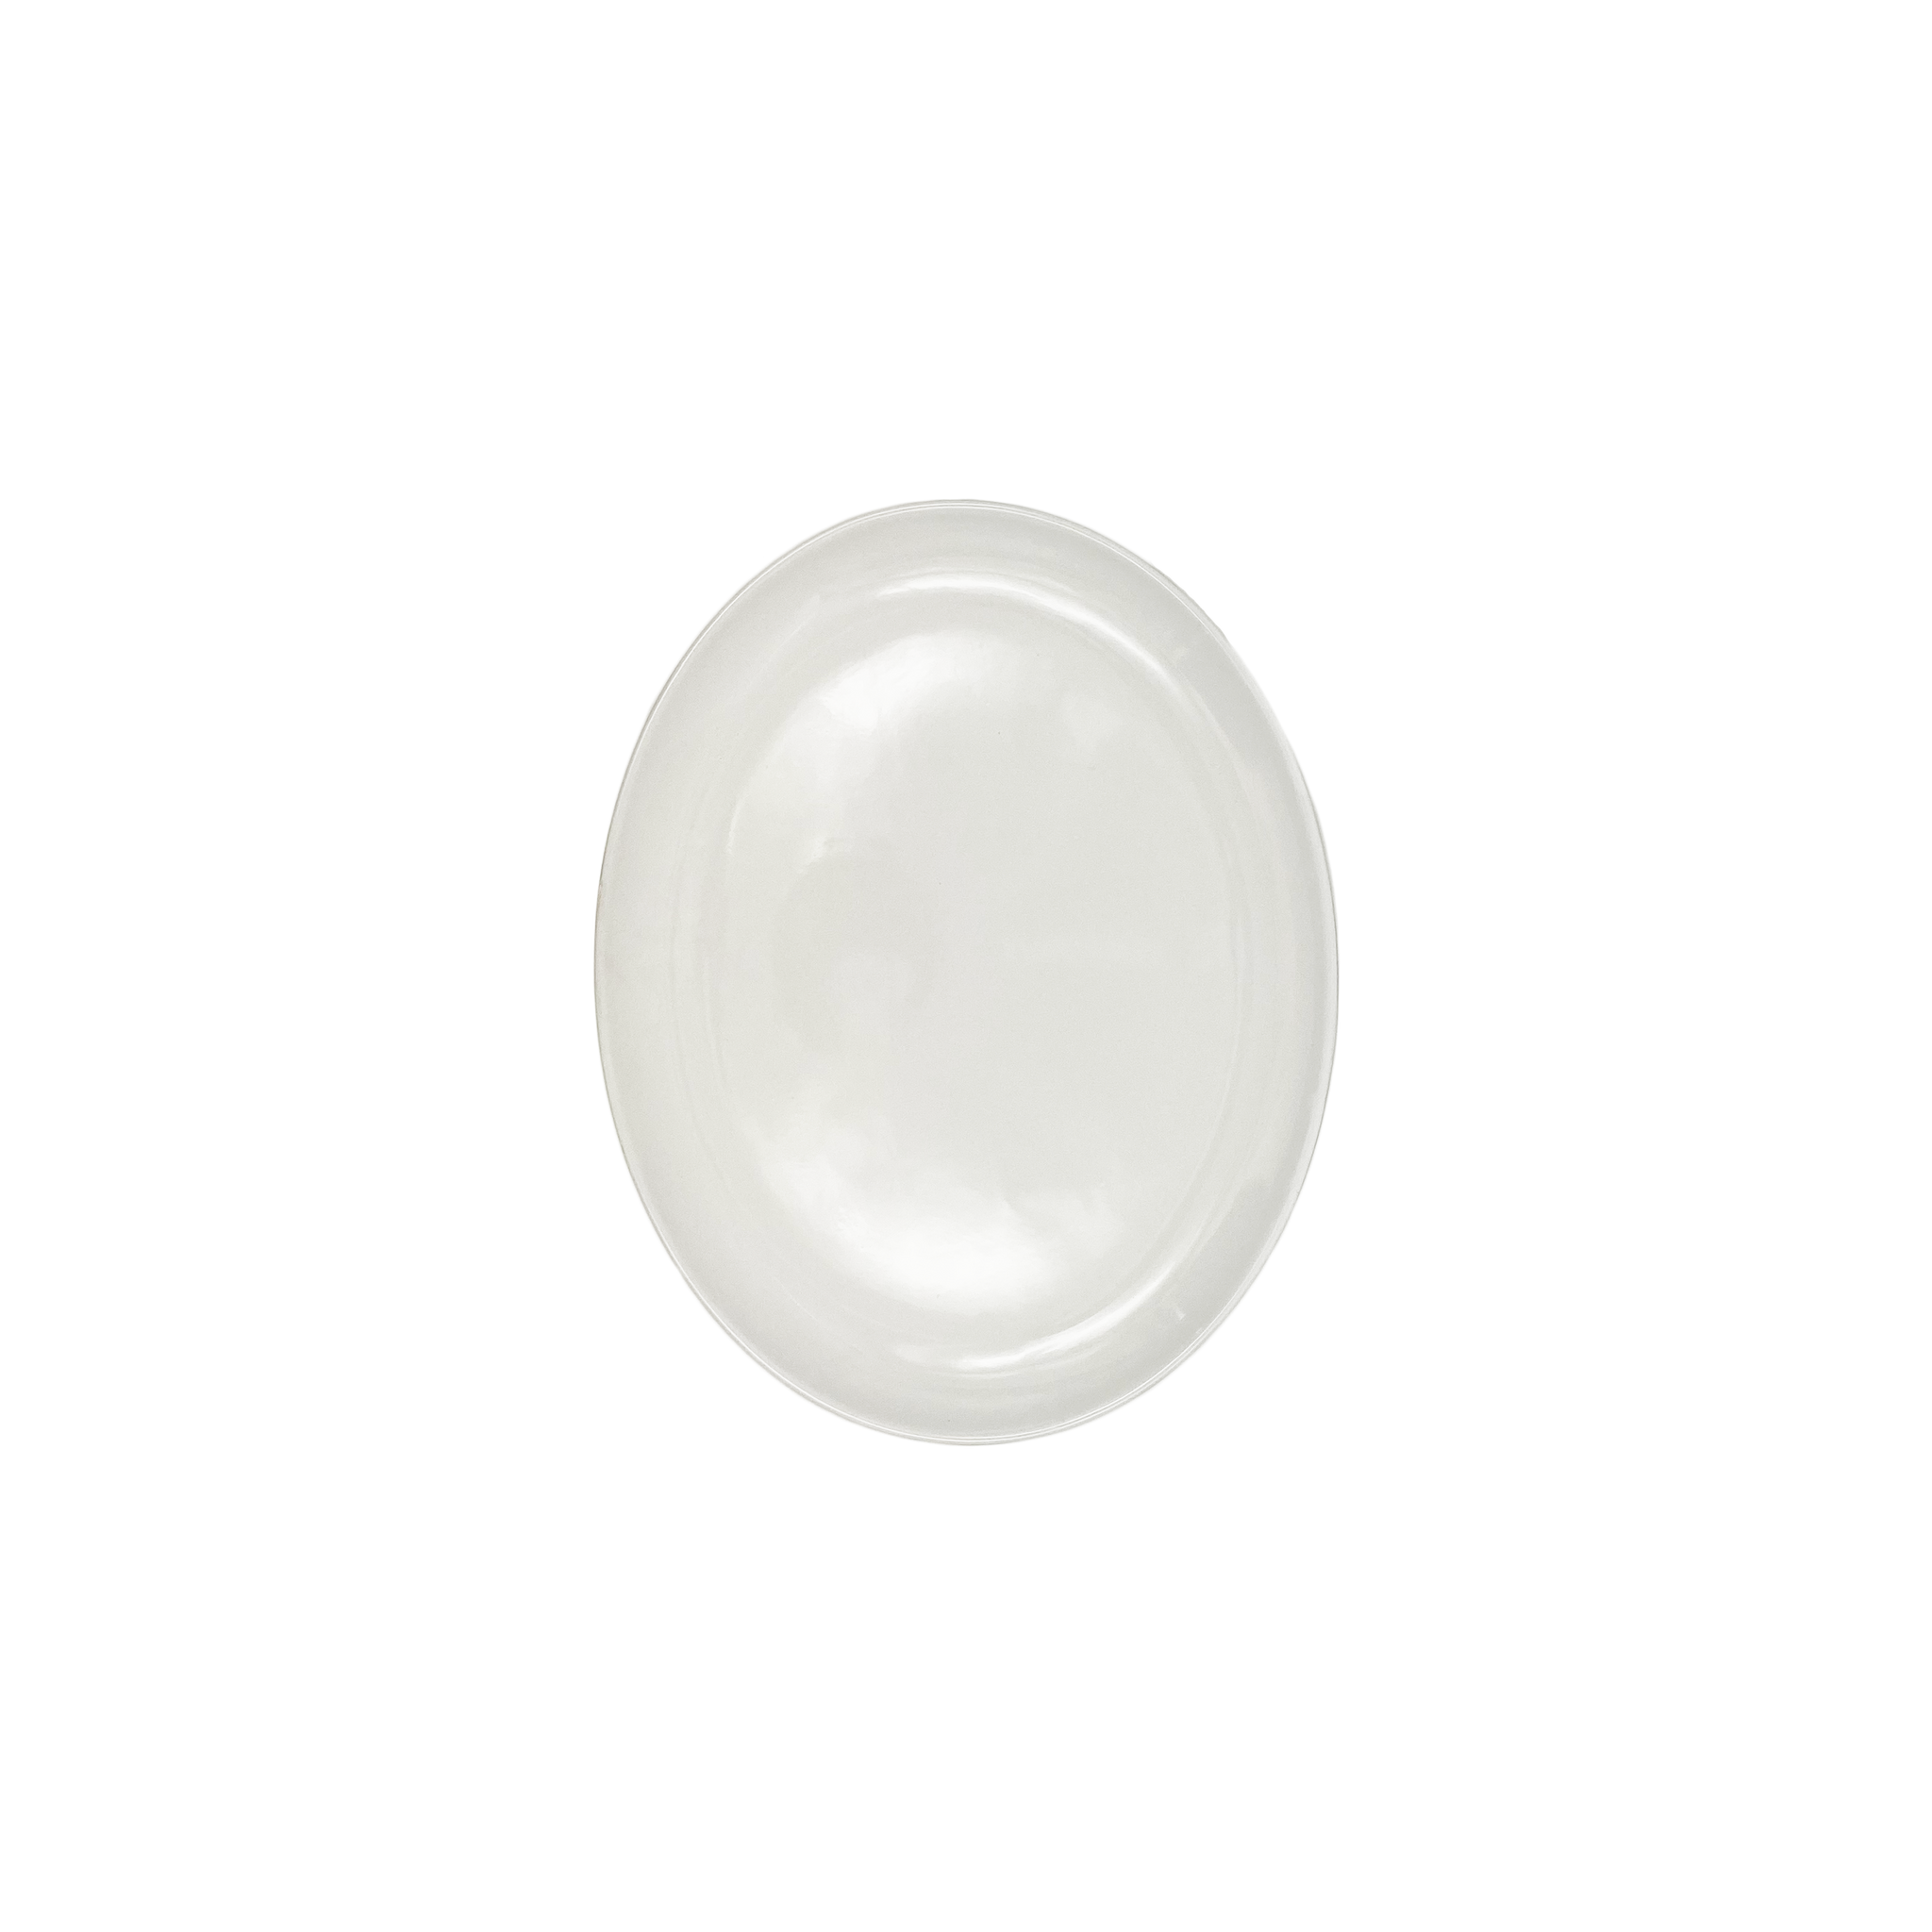 Shell Bisque Medium Oval Plate- White- Set of 4